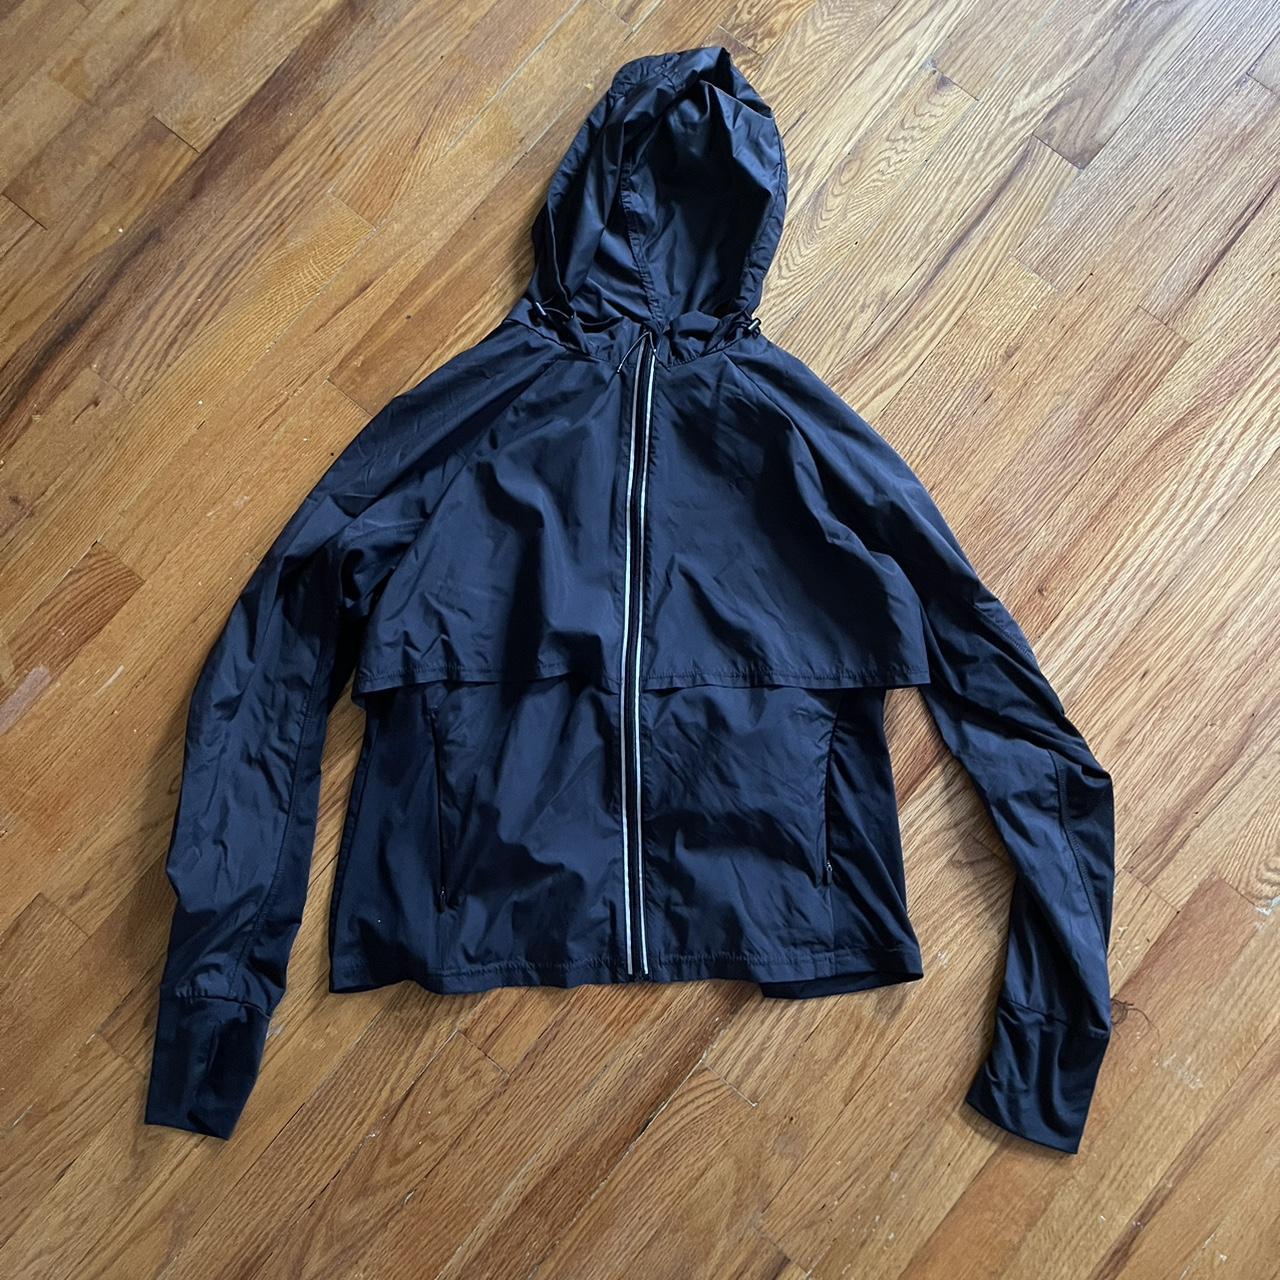 All in Motion water-resistant jacket It's a great - Depop